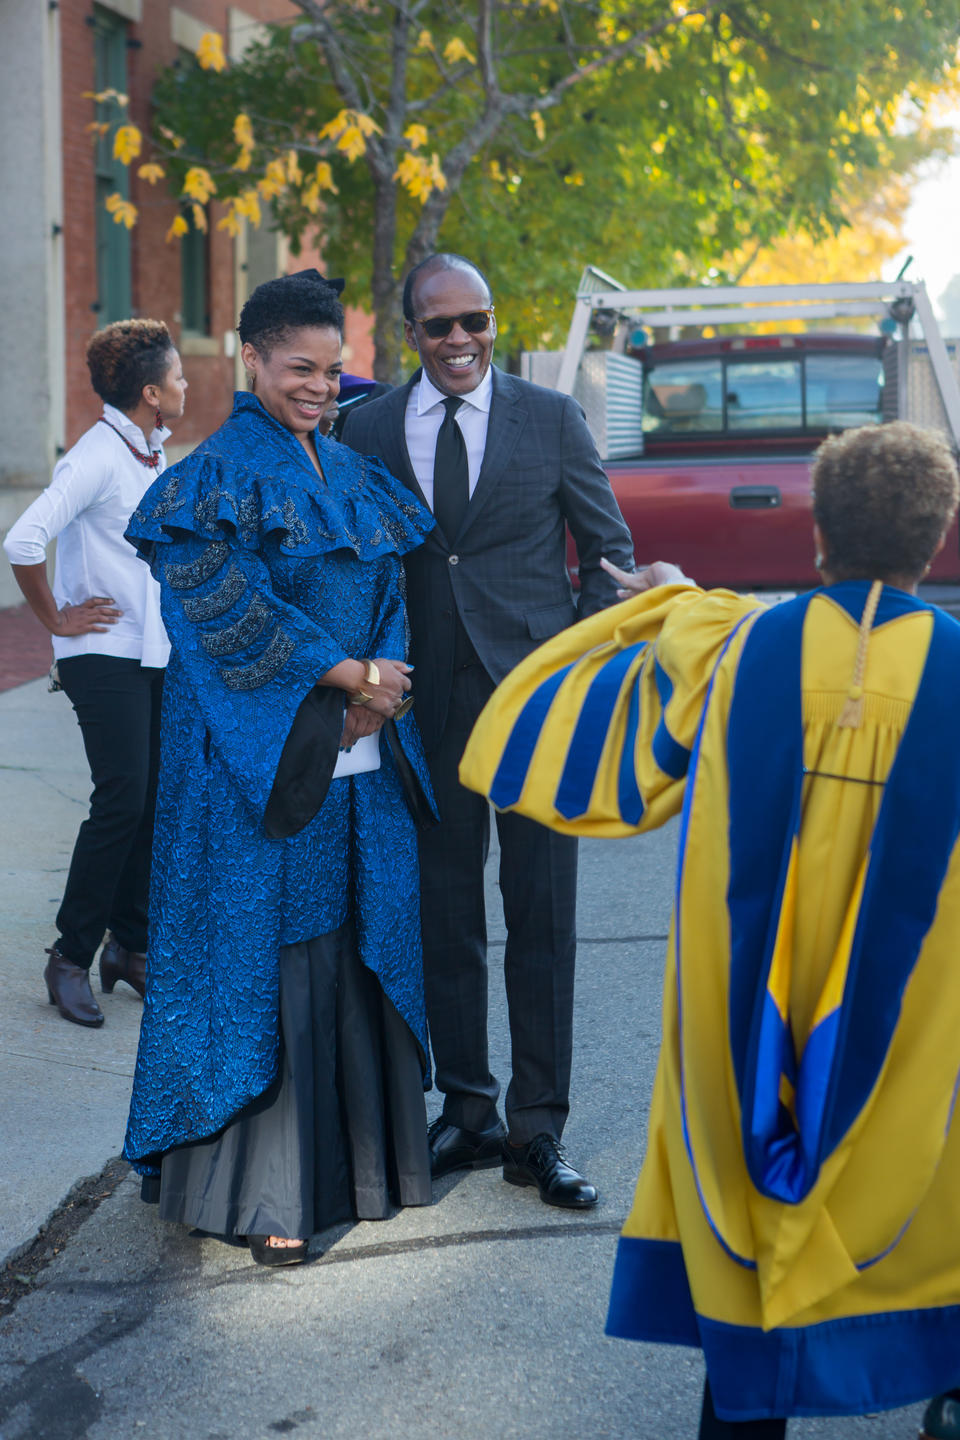 A Black woman in blue ceremonial robes and a Black man in a suit greet a woman in yellow and blue doctoral robes